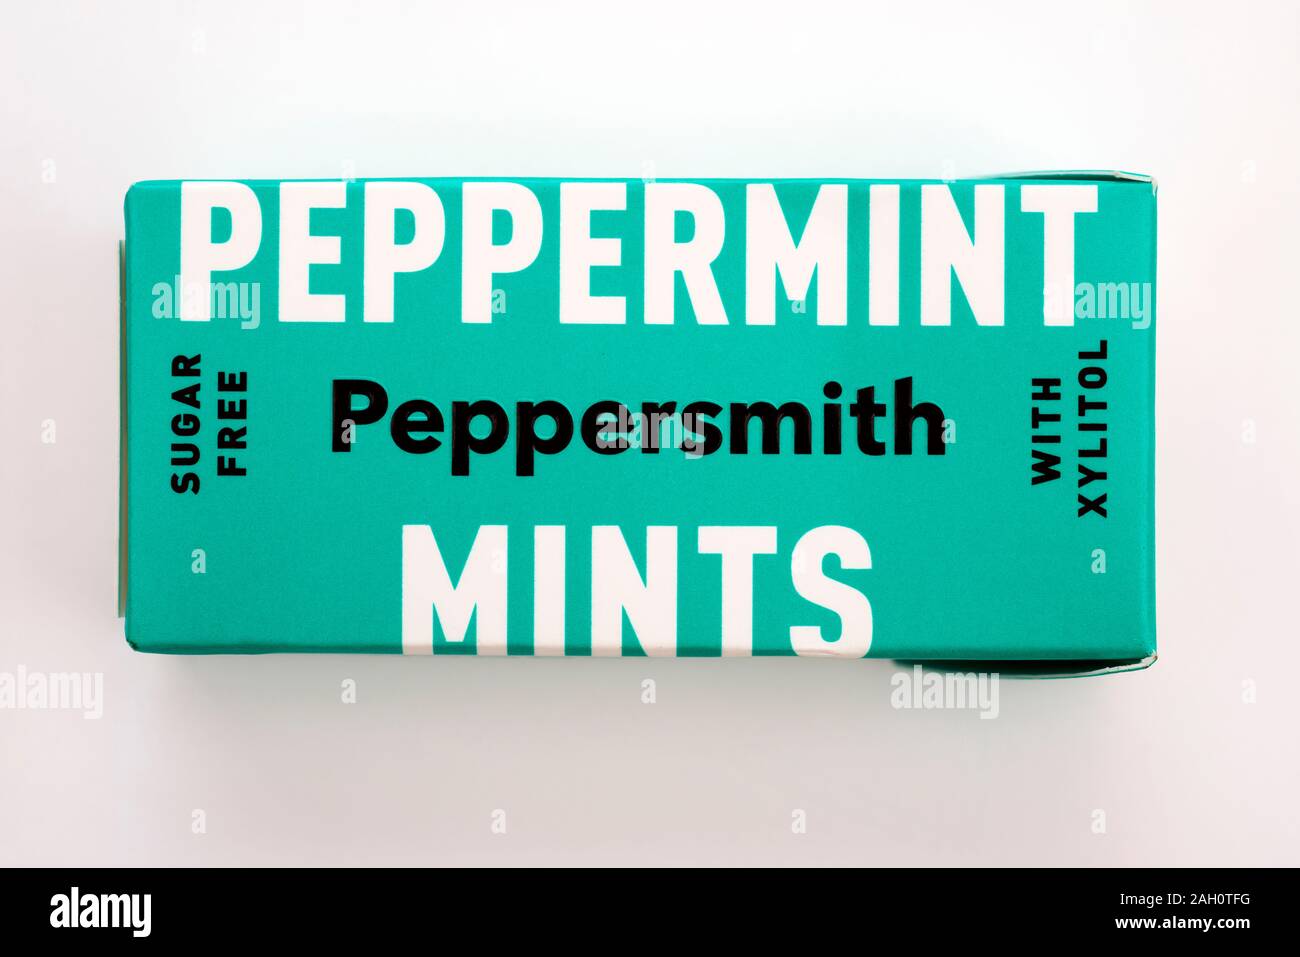 Peppersmith sugar free mints Stock Photo